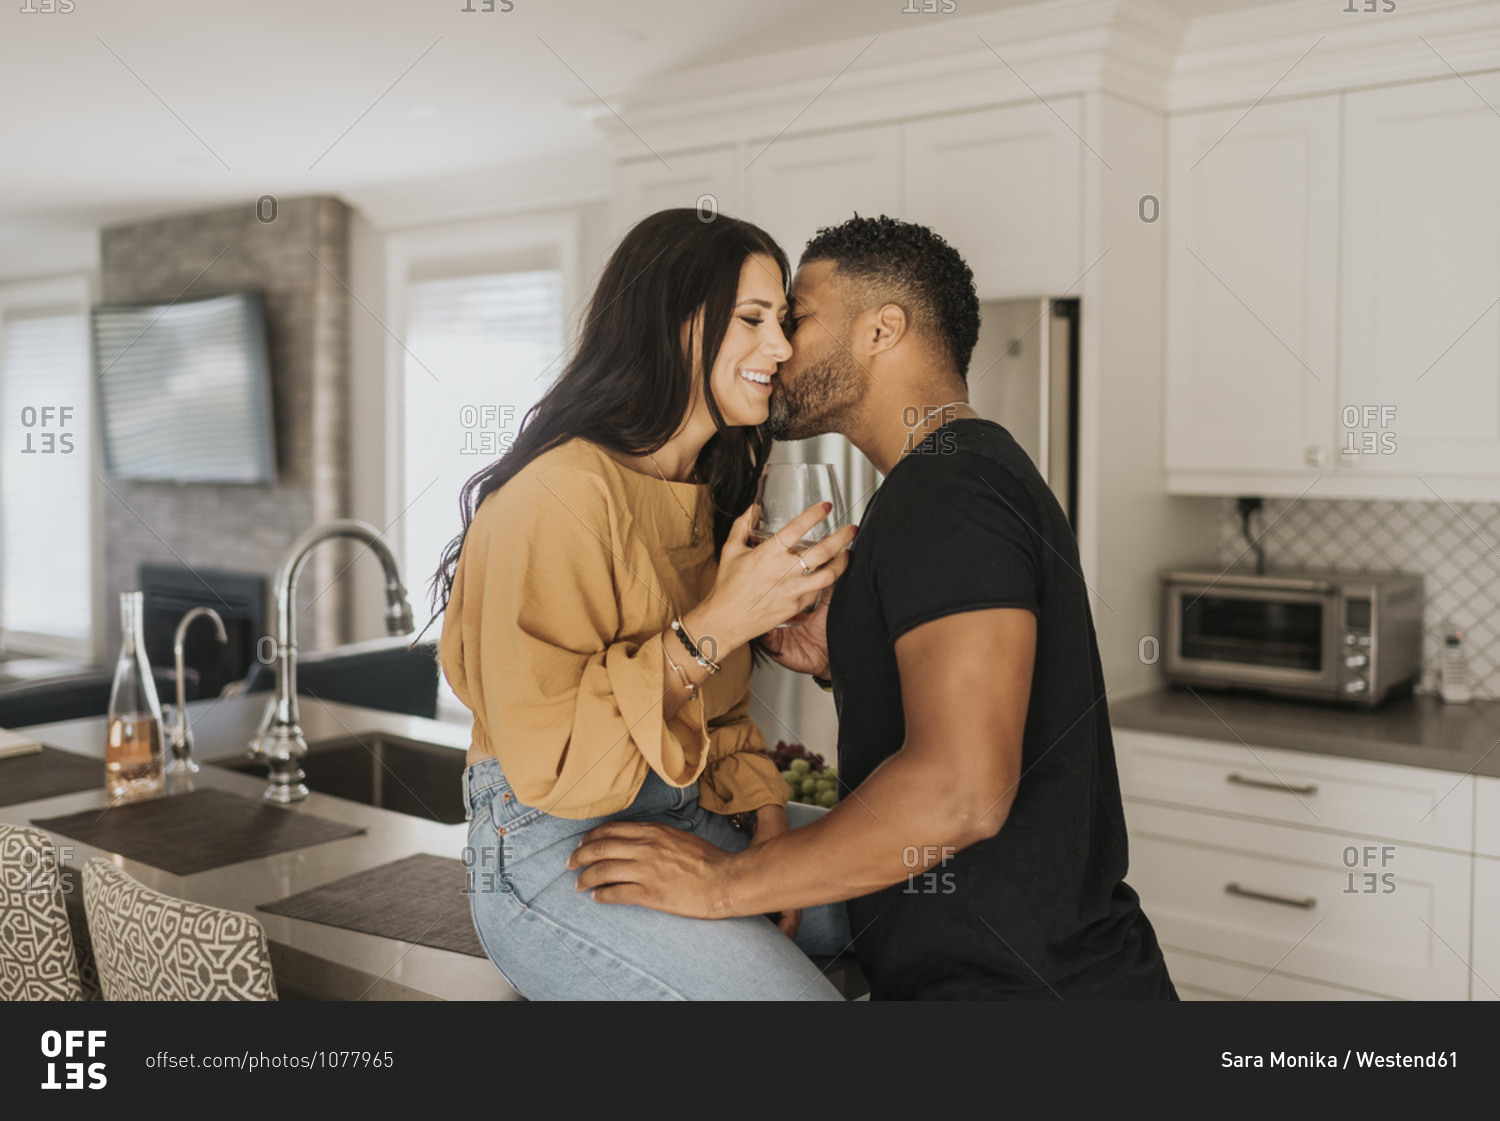 Man kissing woman sitting on kitchen counter at home